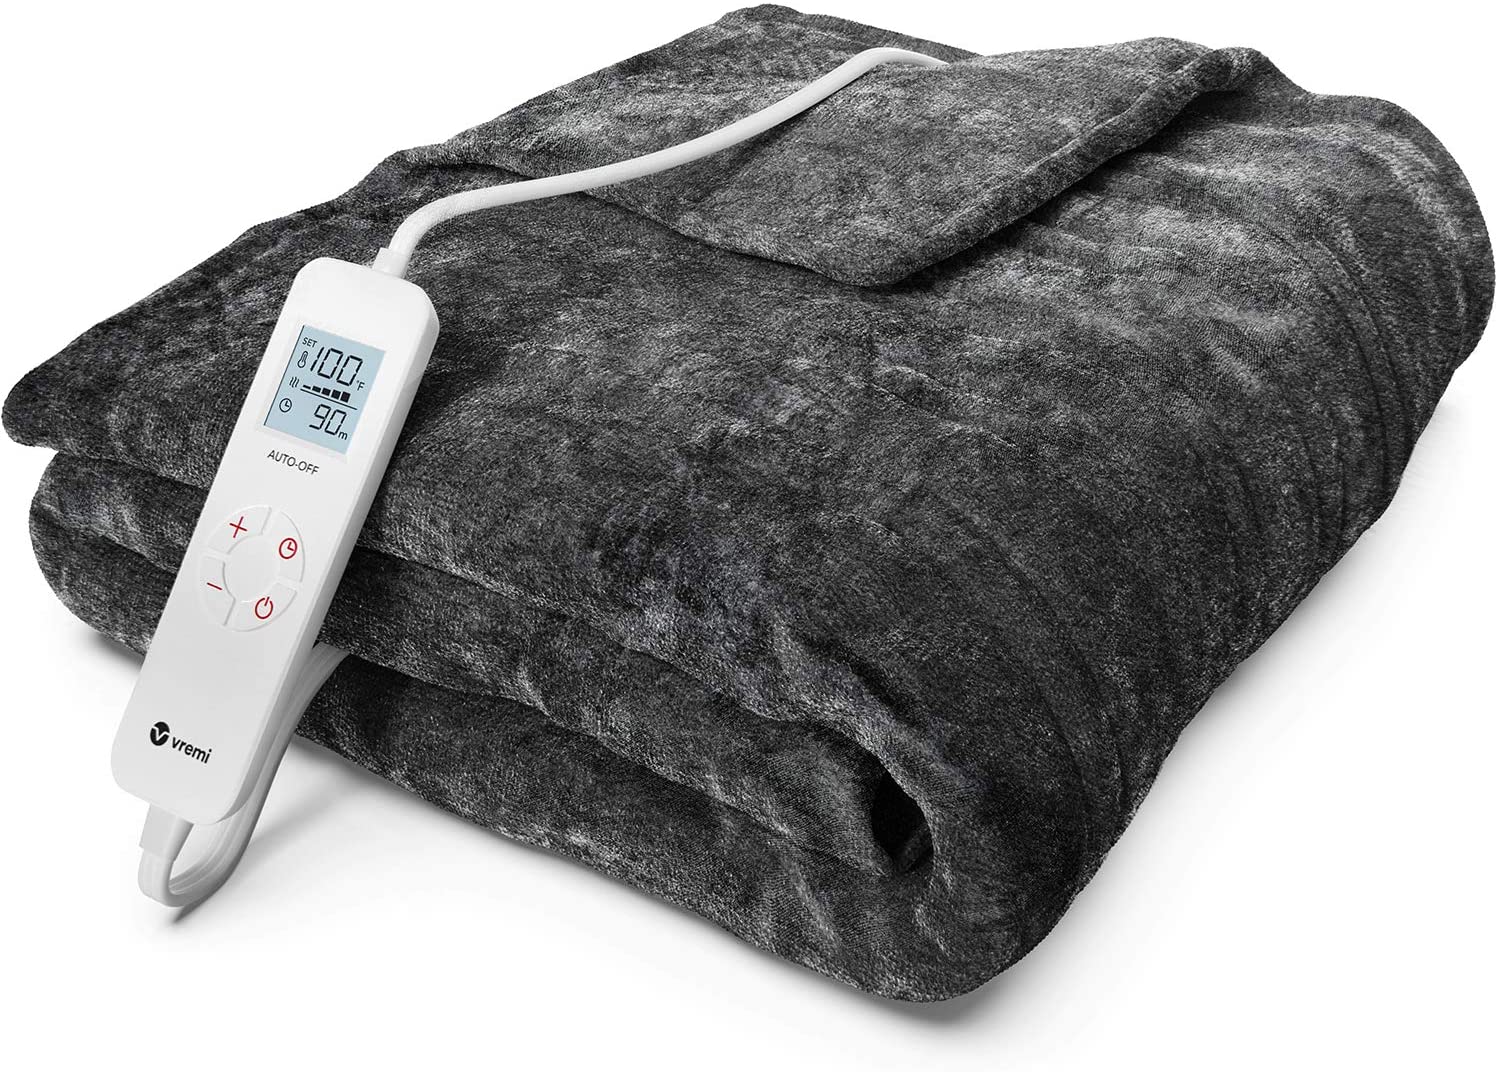 Vremi Electric Heated Blanket - Essential family camping gear